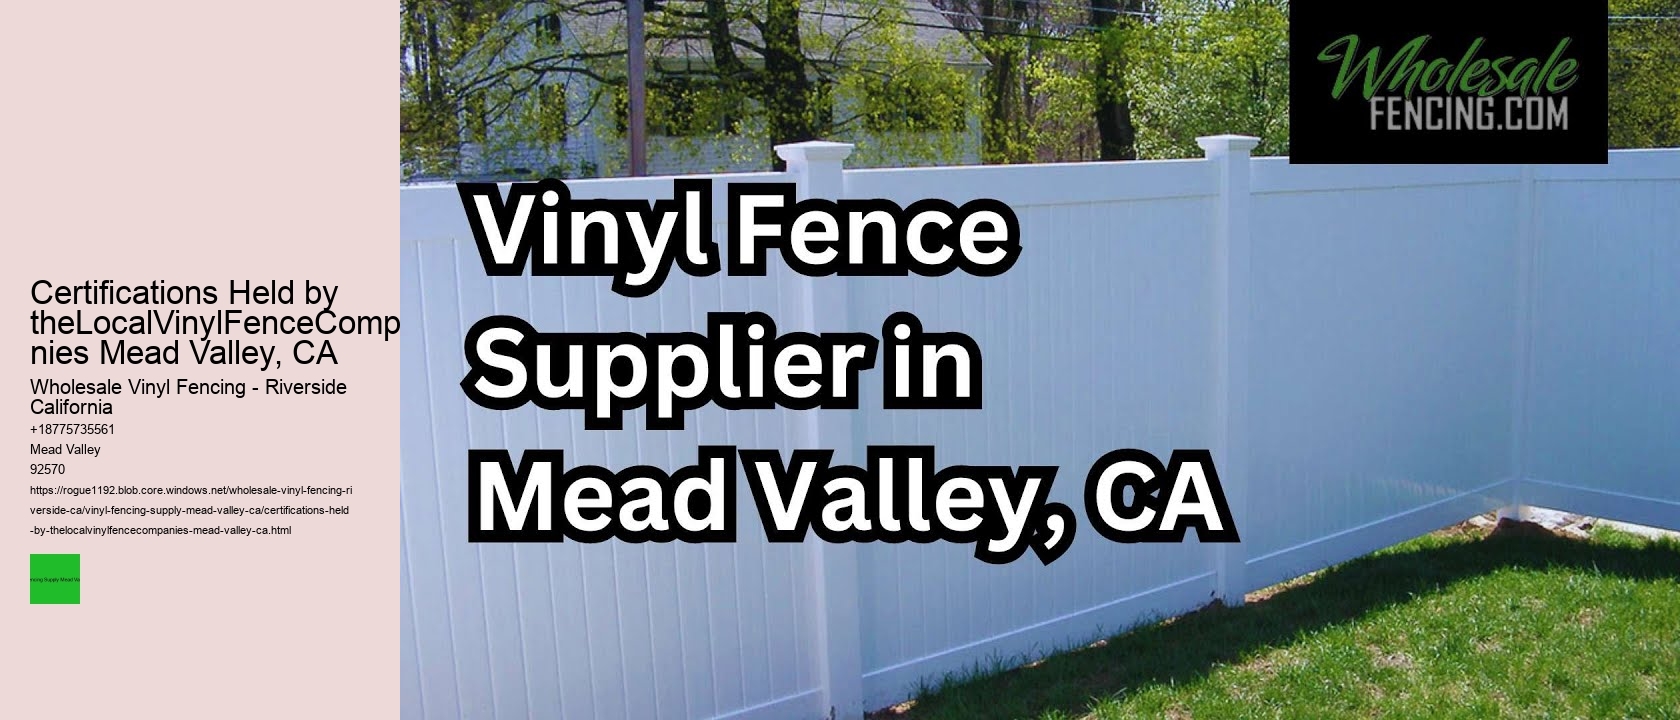 Certifications Held by theLocalVinylFenceCompanies Mead Valley, CA